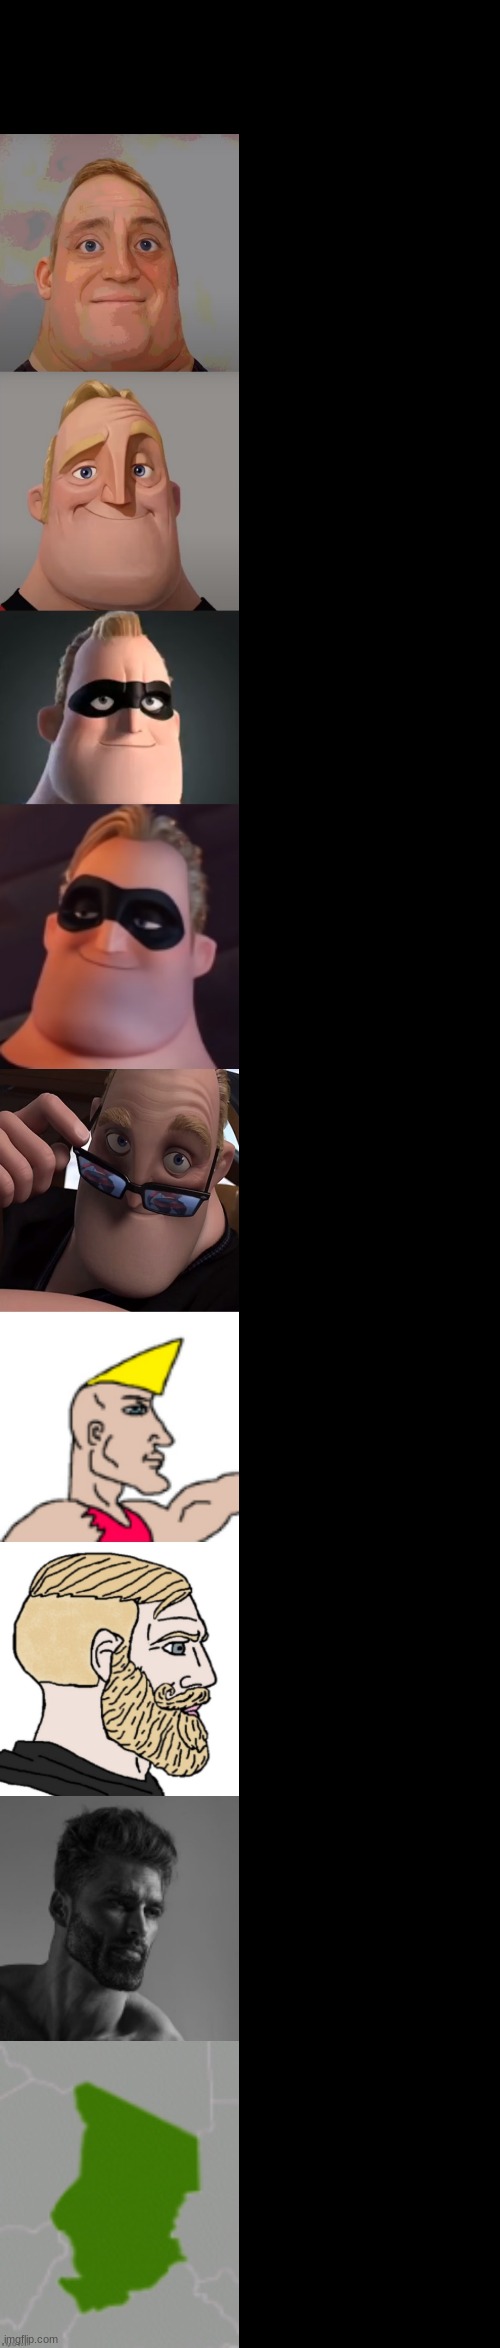 Mr Incredible becoming chad Blank Meme Template